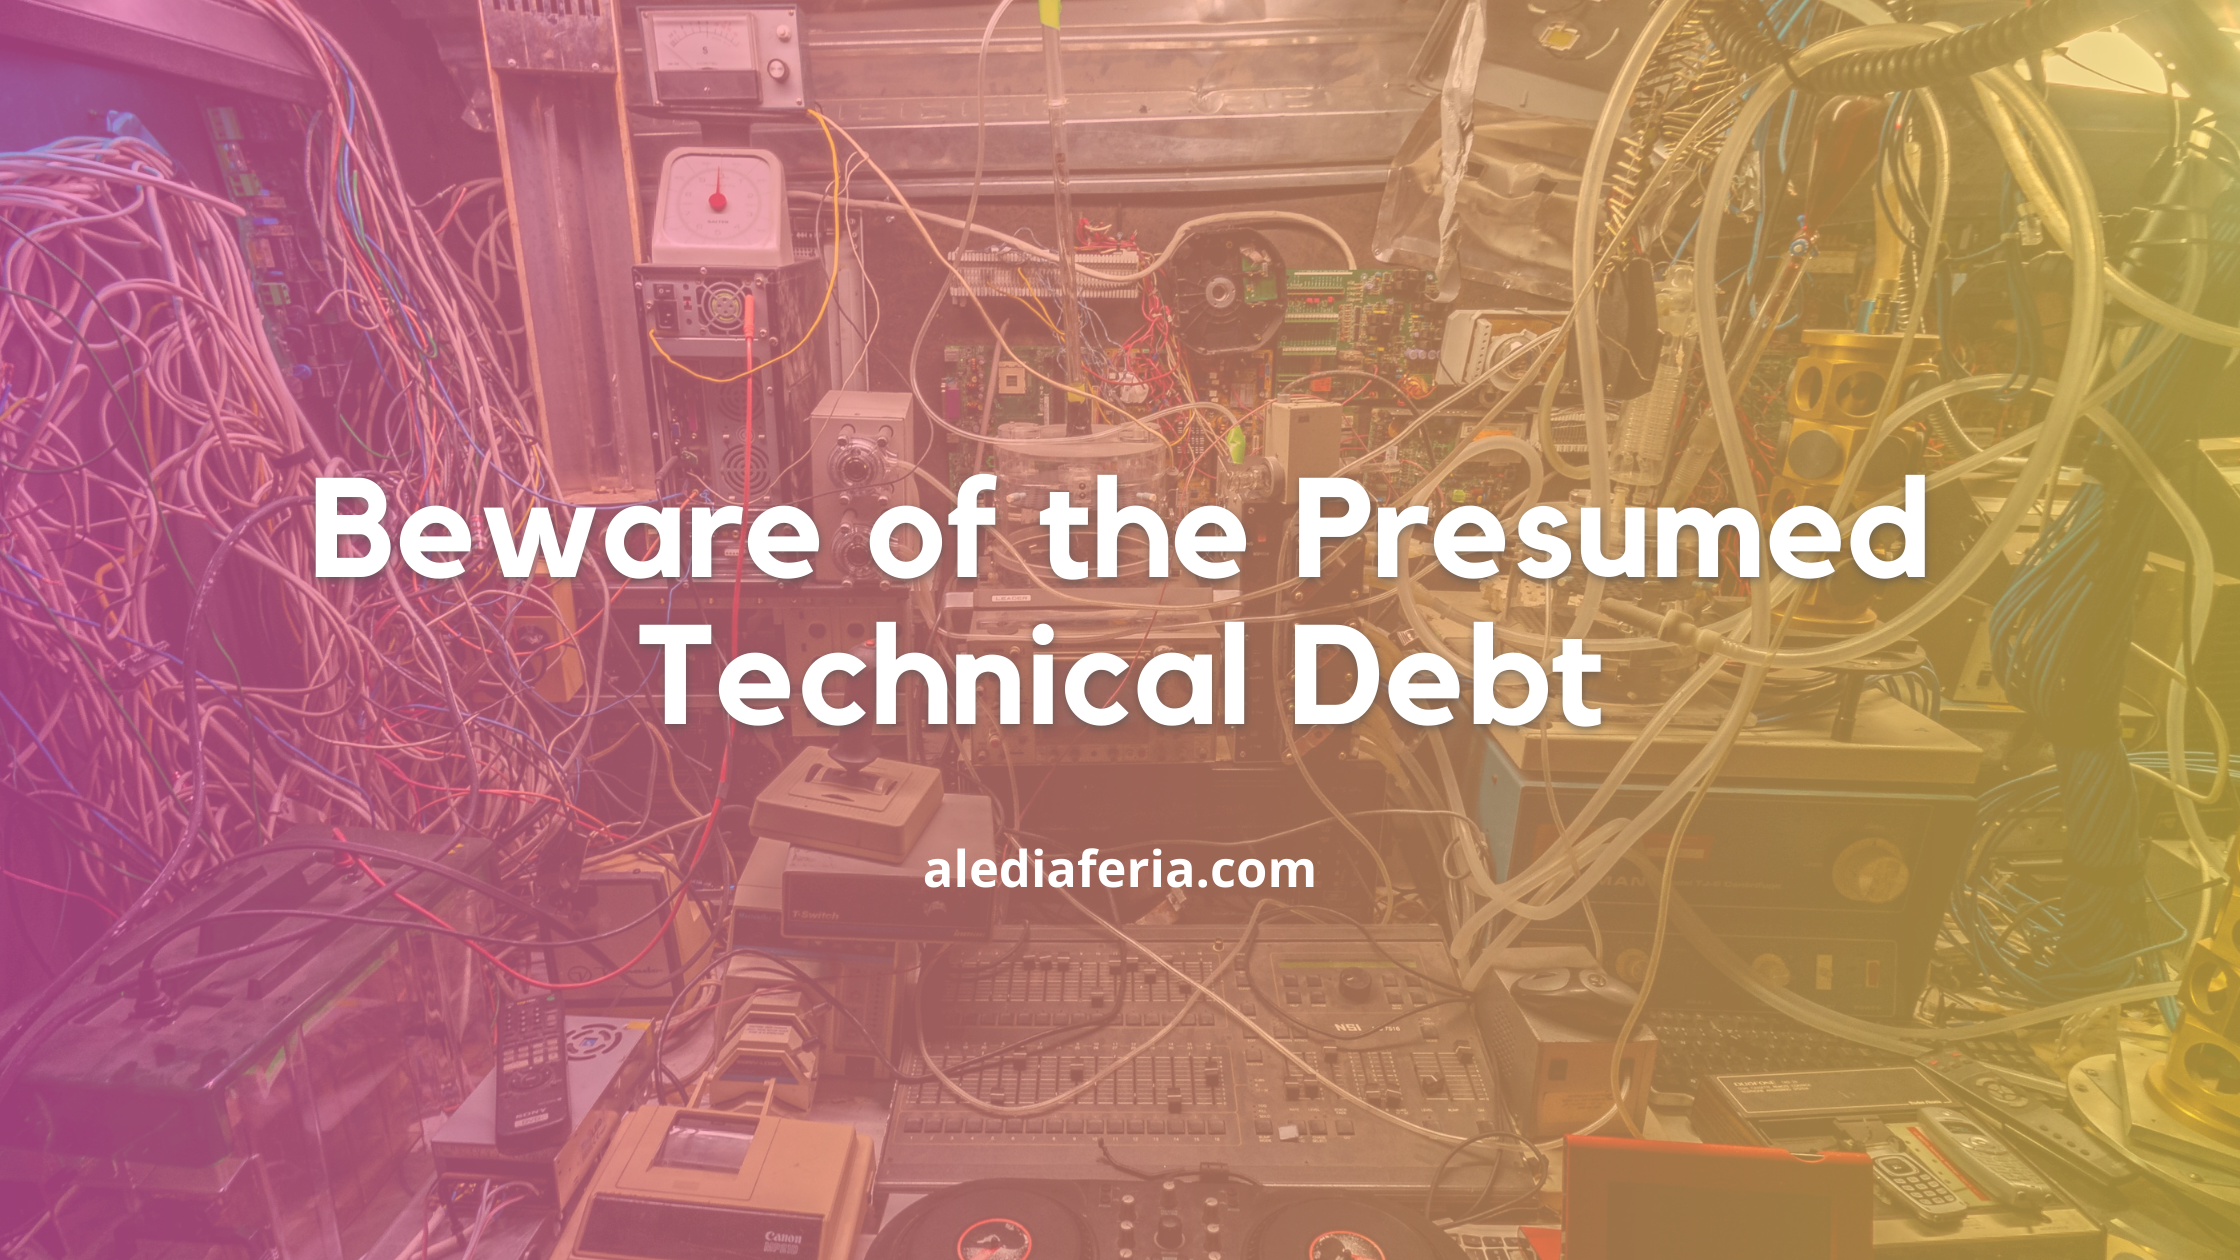 Presumed technical debt: how to recognise it and avoid it